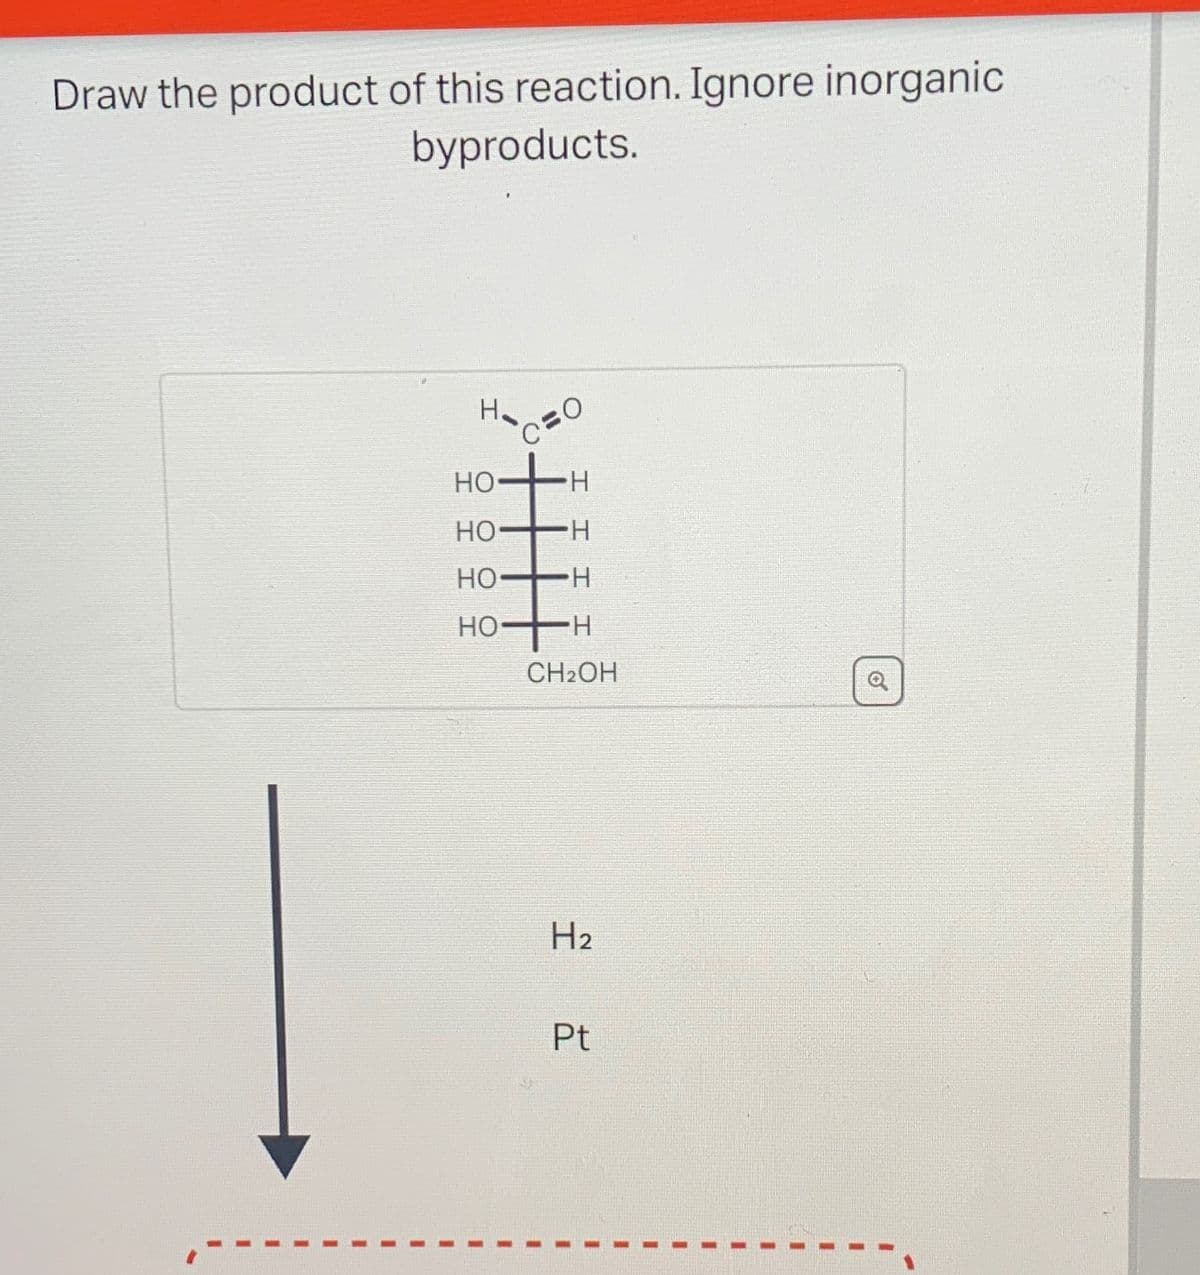 Draw the product of this reaction. Ignore inorganic
byproducts.
HO
H
HO-
・H
HO
・H
HO
・H
CH2OH
H2
Pt
C